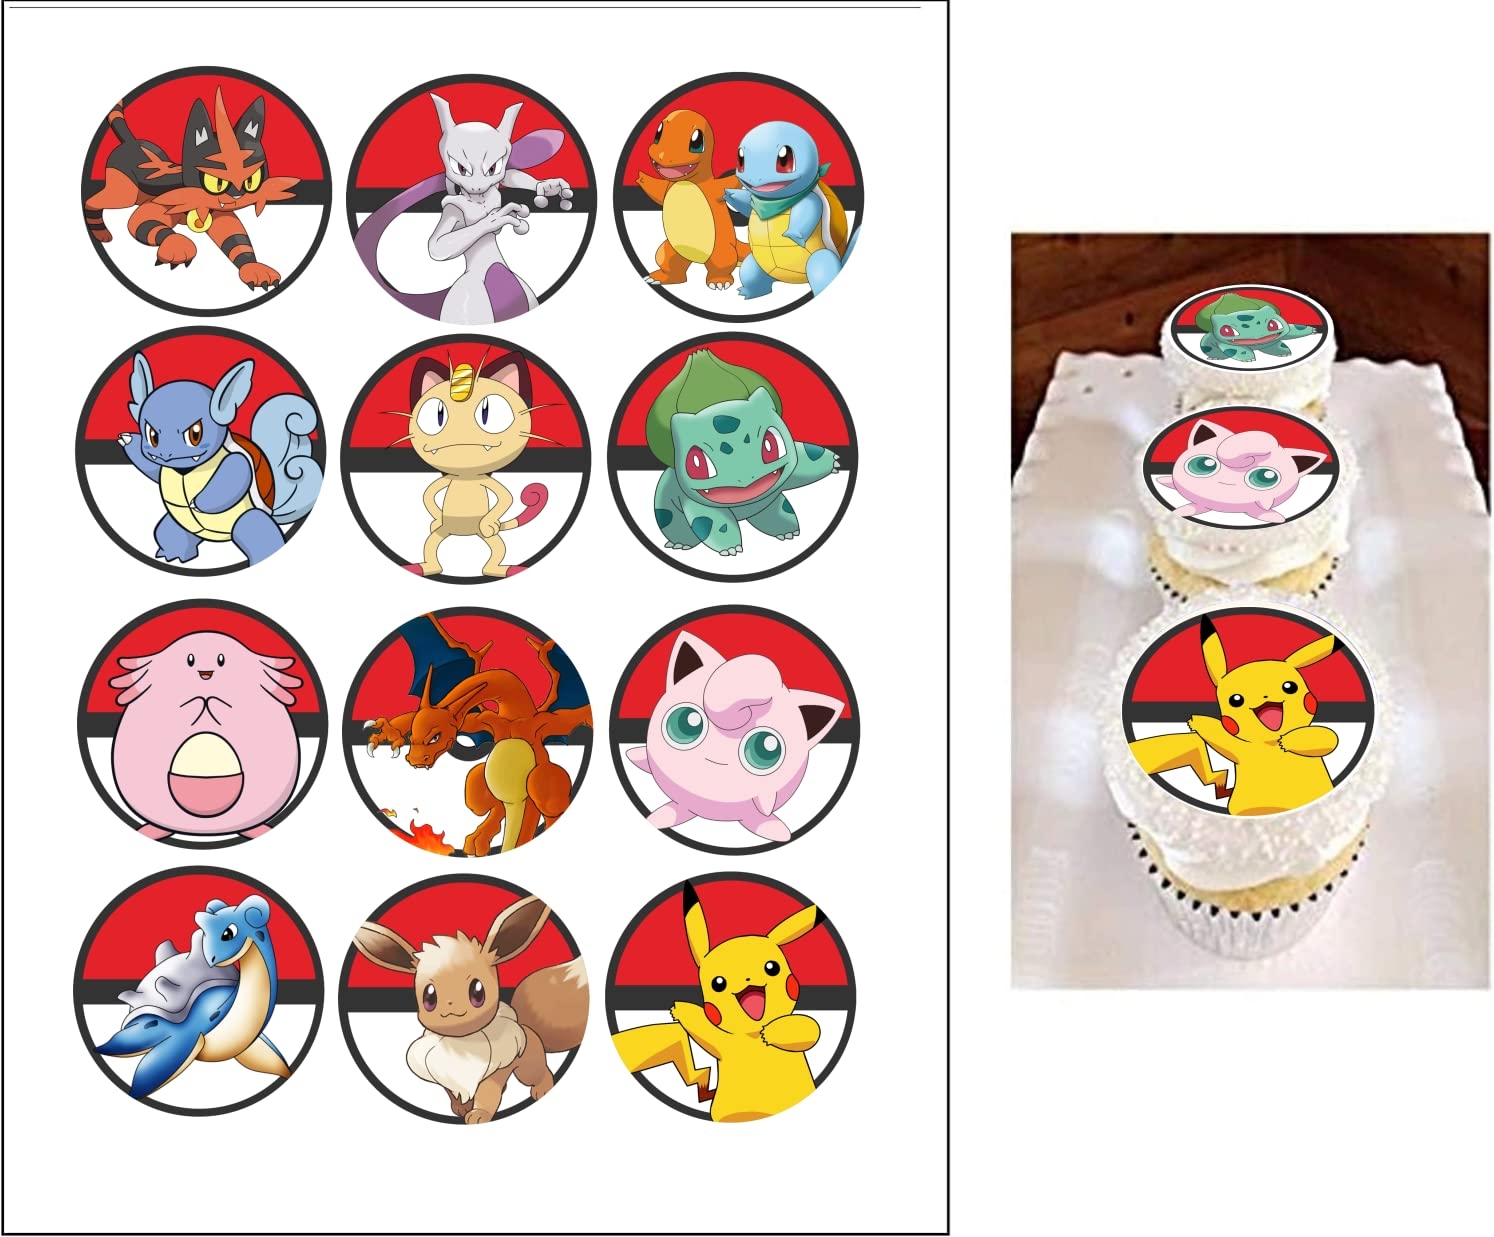 Amazon 24 Edible Pokemon Cupcake Toppers Wafer Paper Edible Image Poke Ball Themed Birthday Cupcake Toppers Or Cake Decorations Cake Stickers